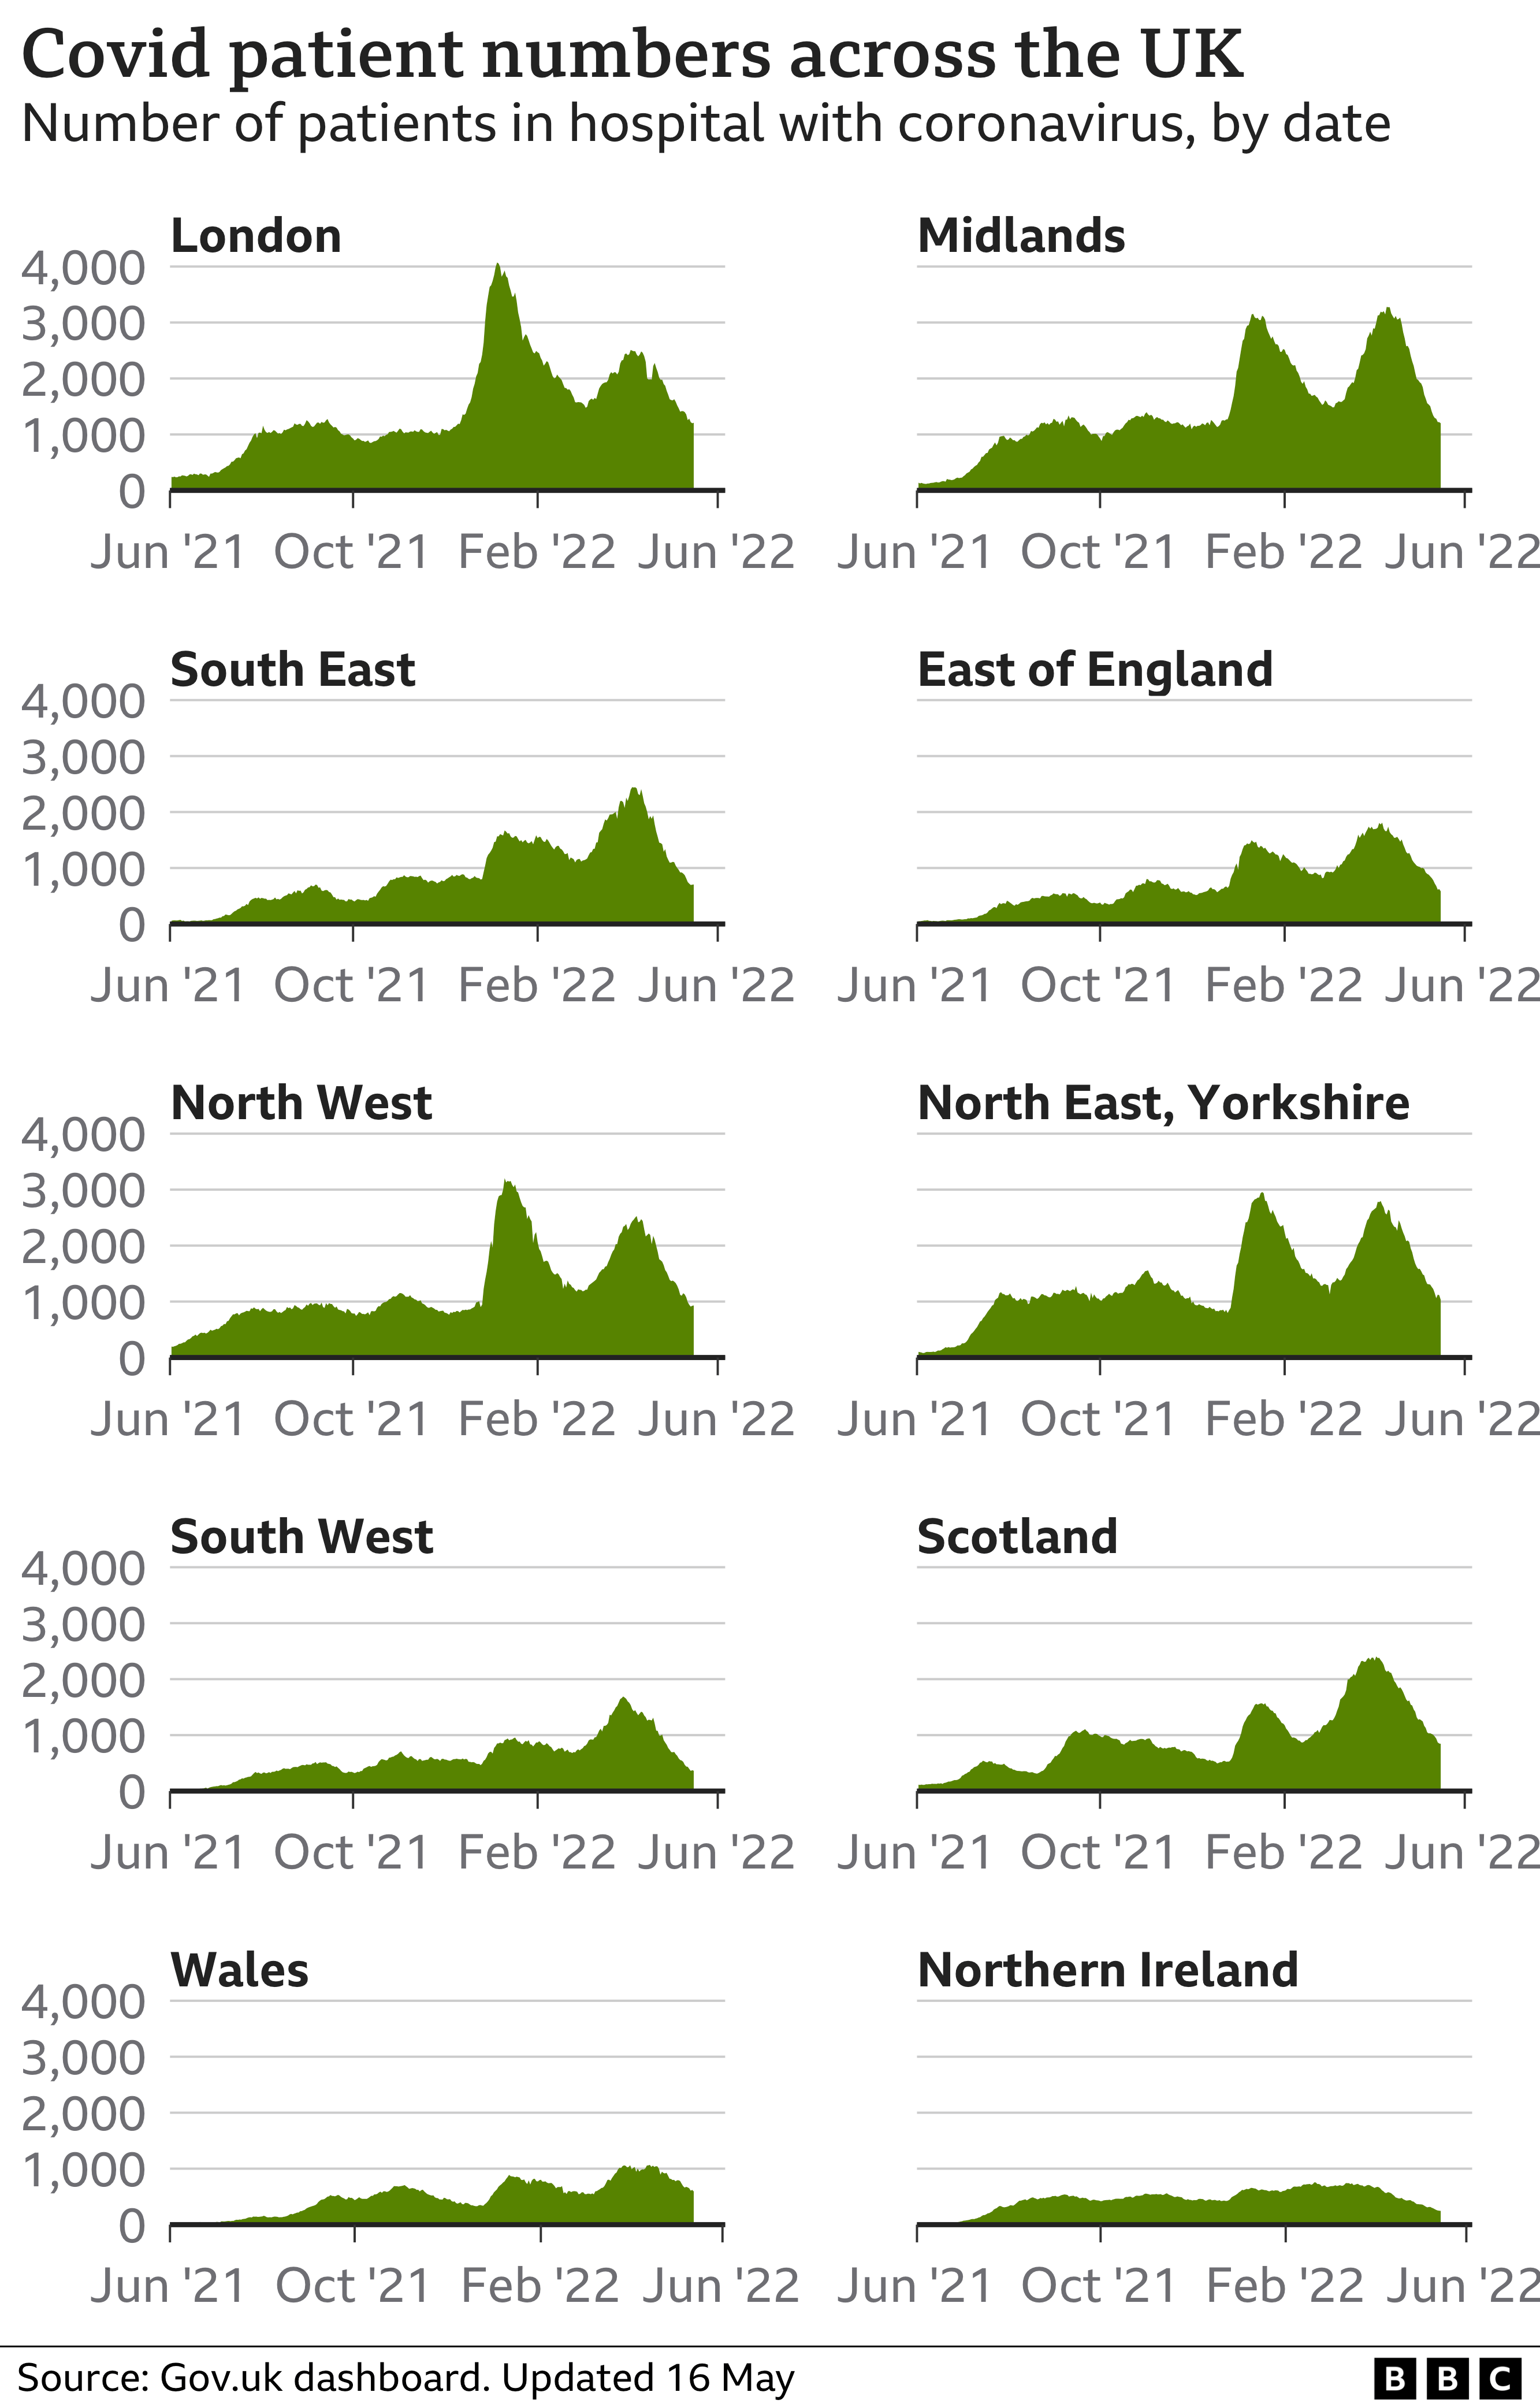 chart showing Covid patient numbers across the UK